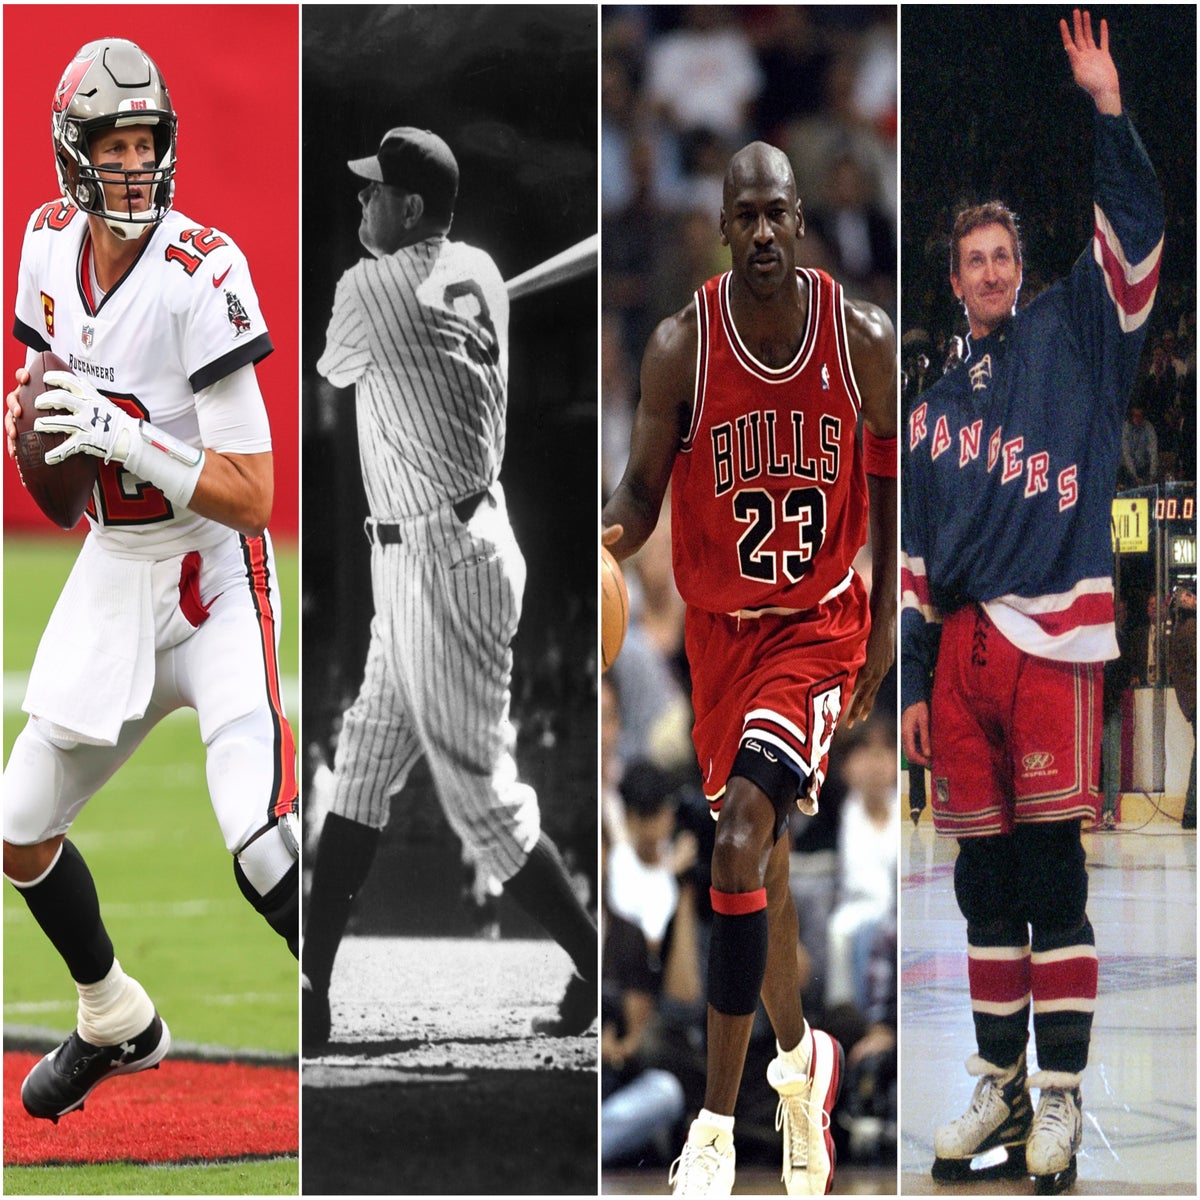 Who is the greatest Major League star of all time? Ranking Ruth